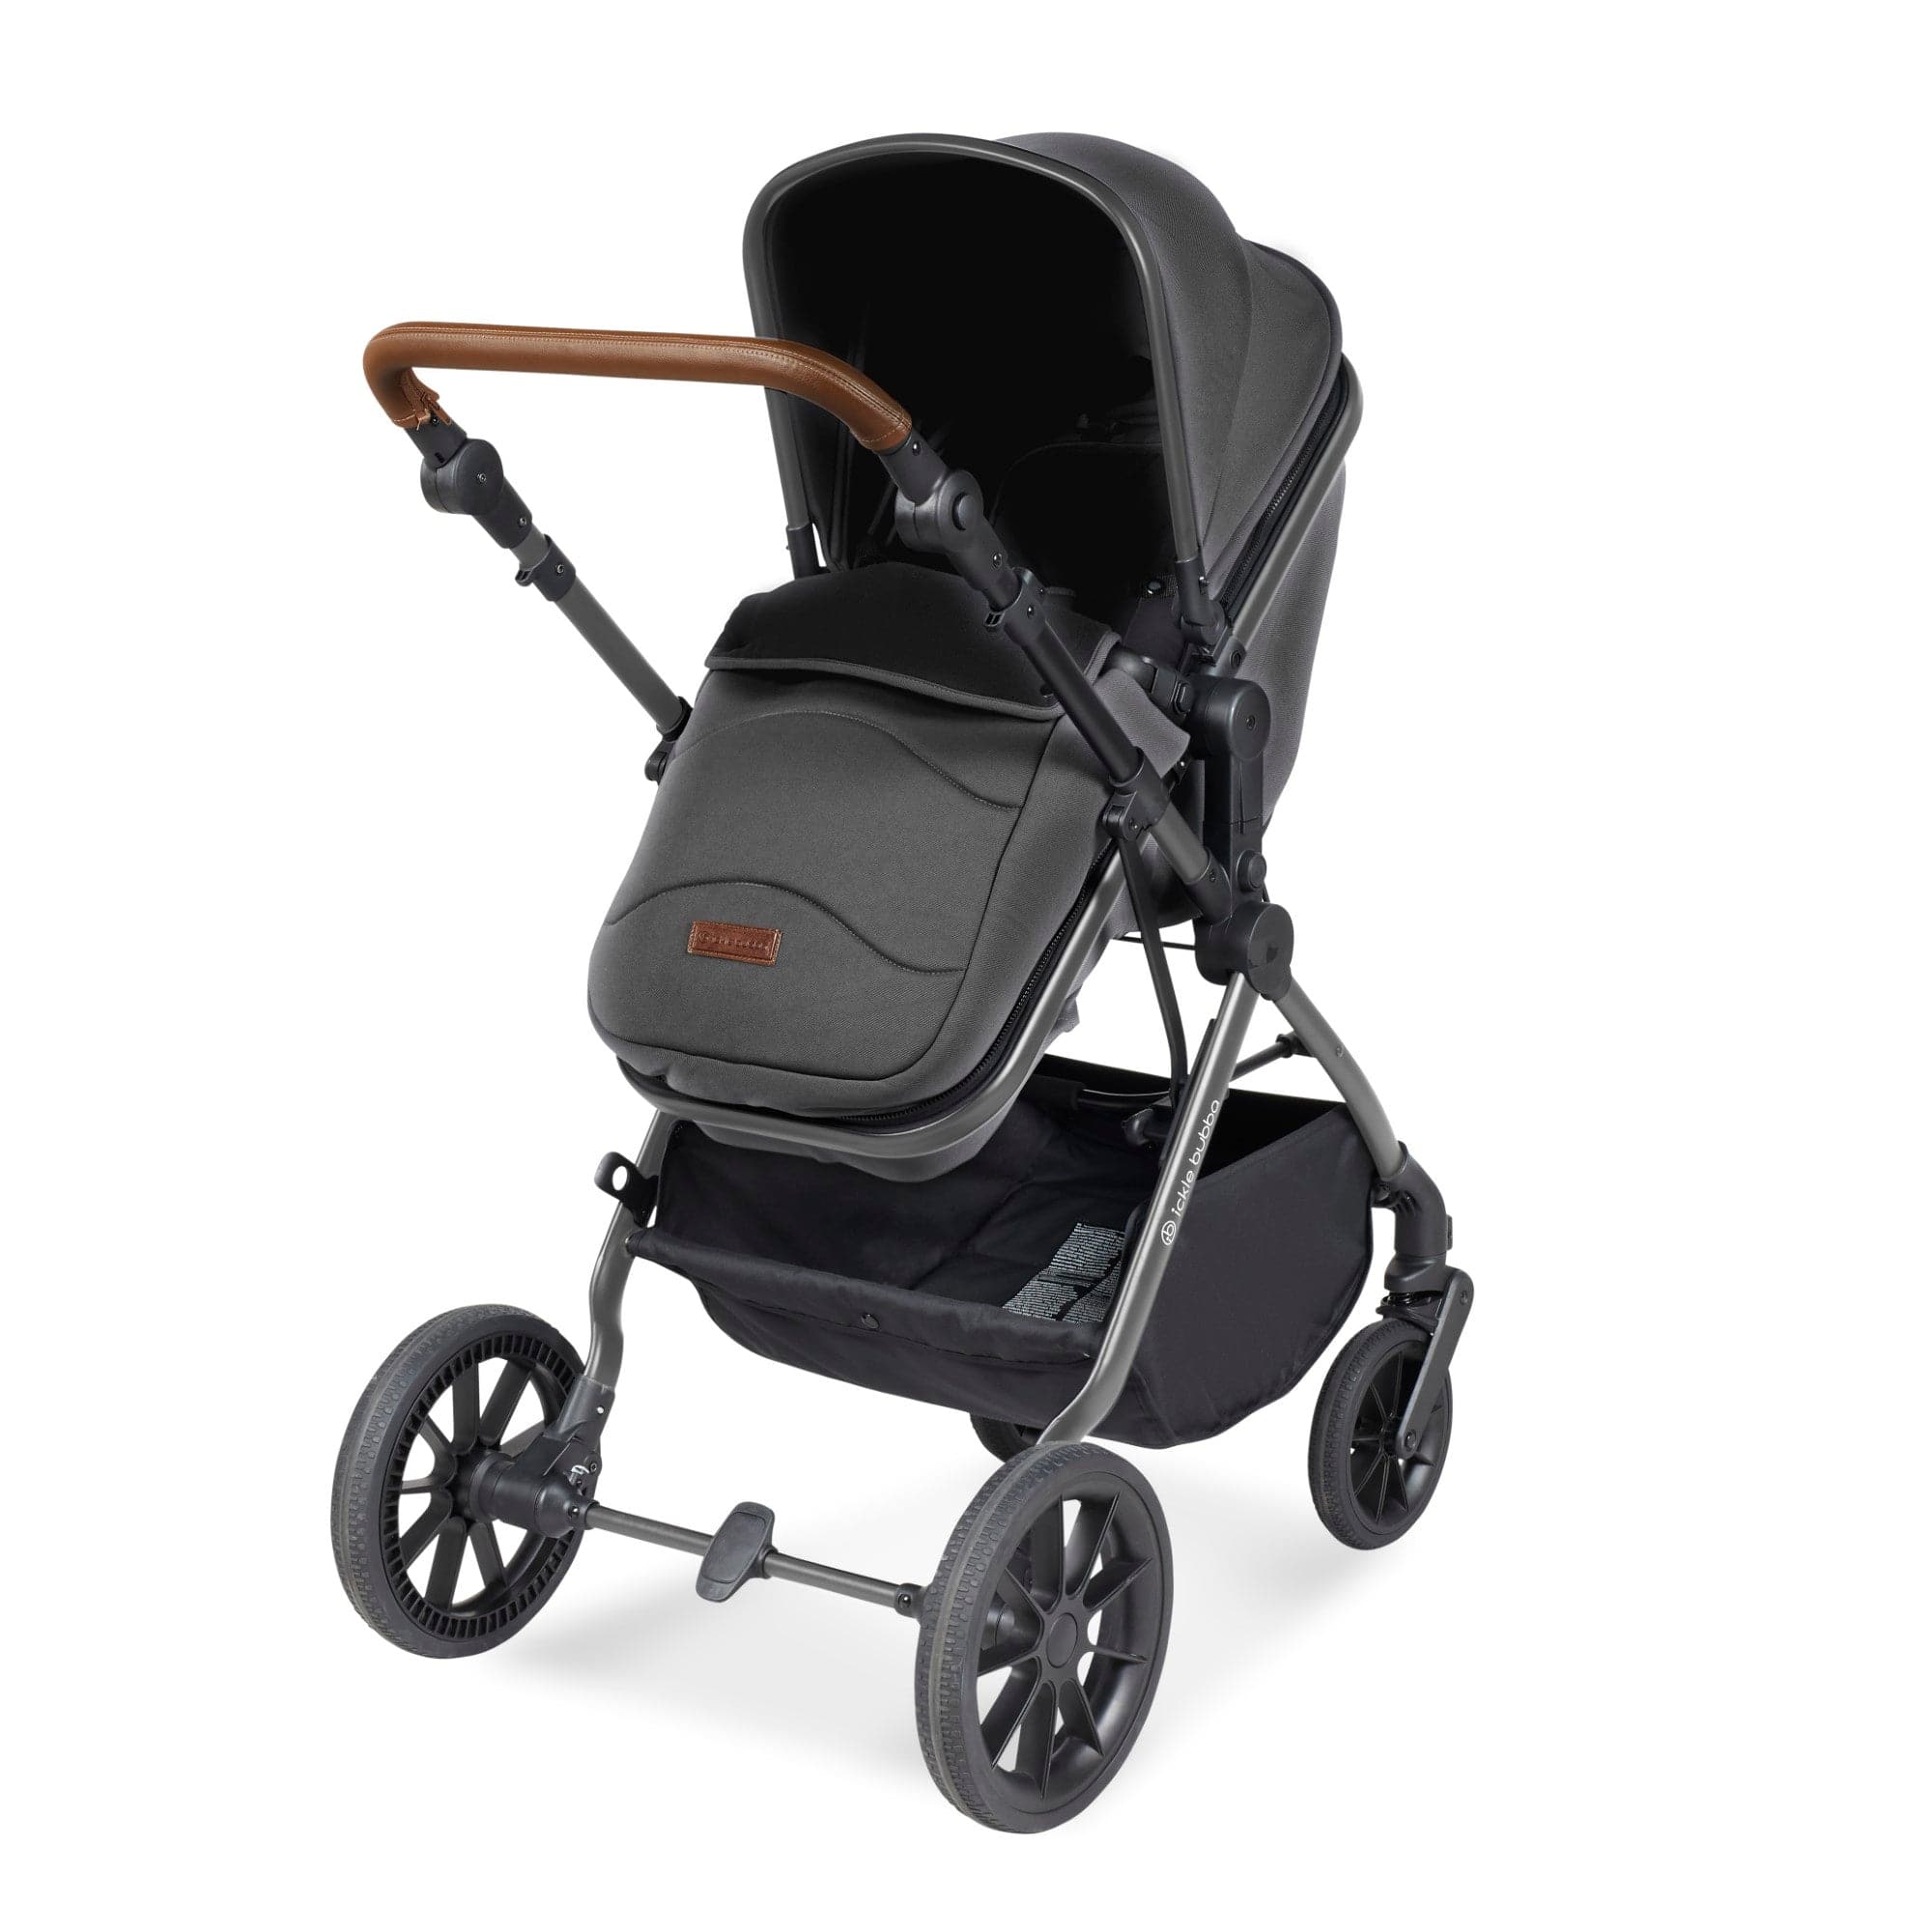 Ickle Bubba Cosmo I-Size Travel System With Stratus Car Seat & Isofix Base - Graphite Grey -  | For Your Little One